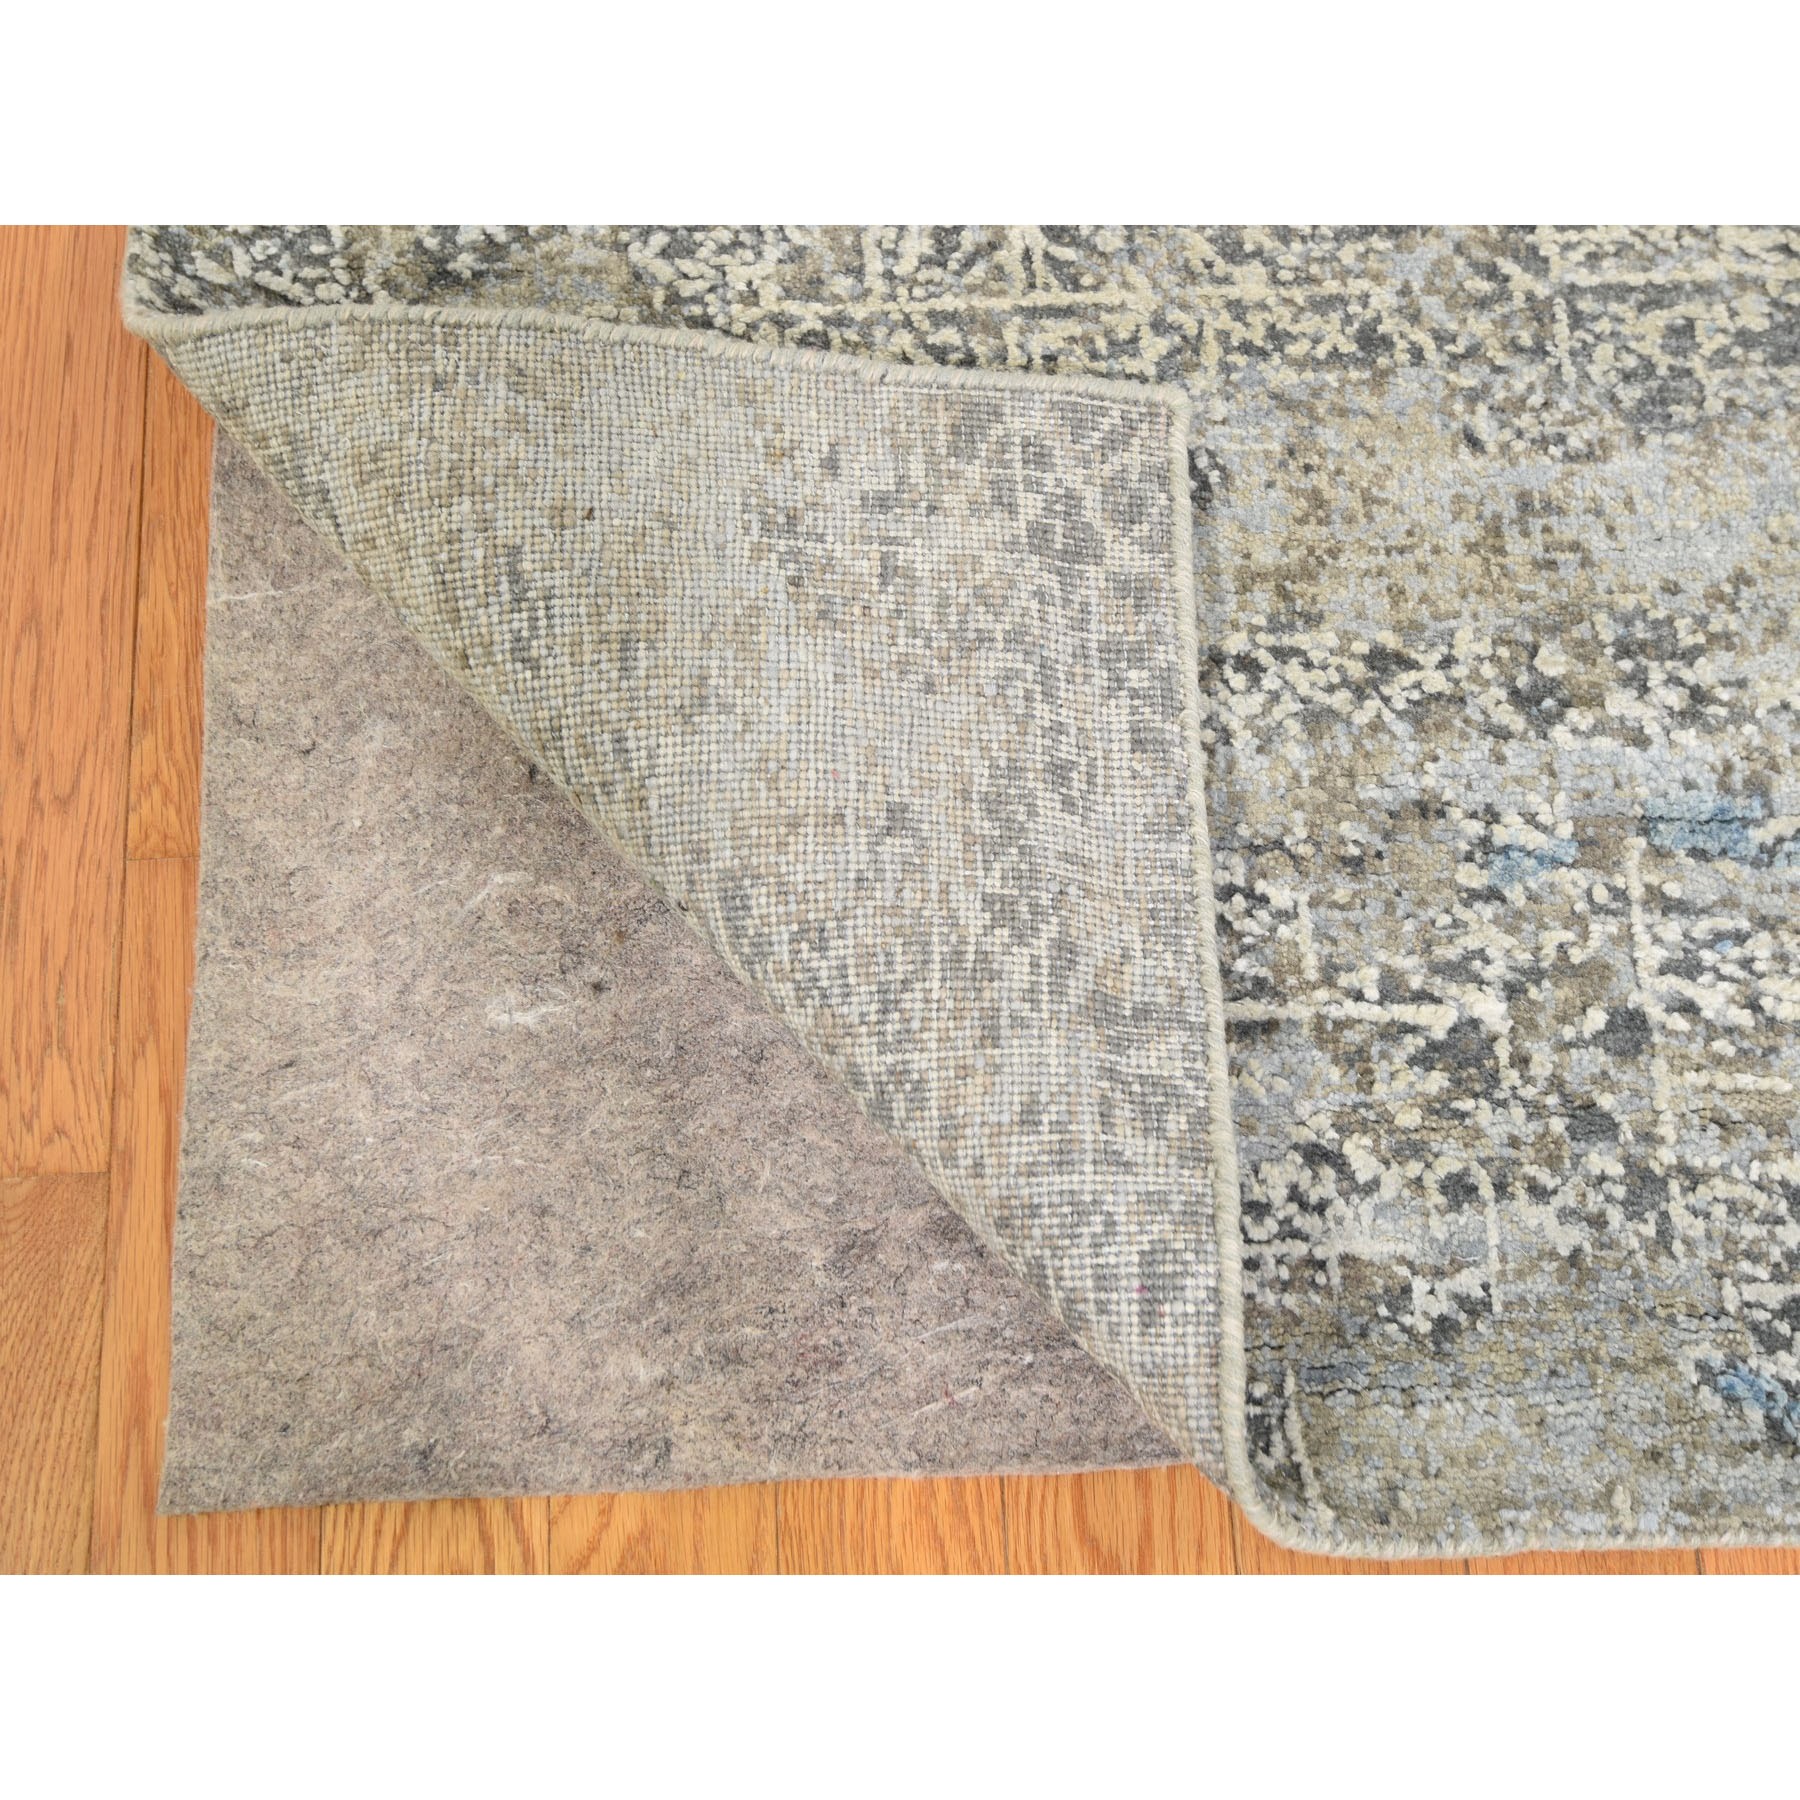 9'x12'3" Wool With Pure Silk Abstract Design Soft Color Hand Woven Oriental Rug 